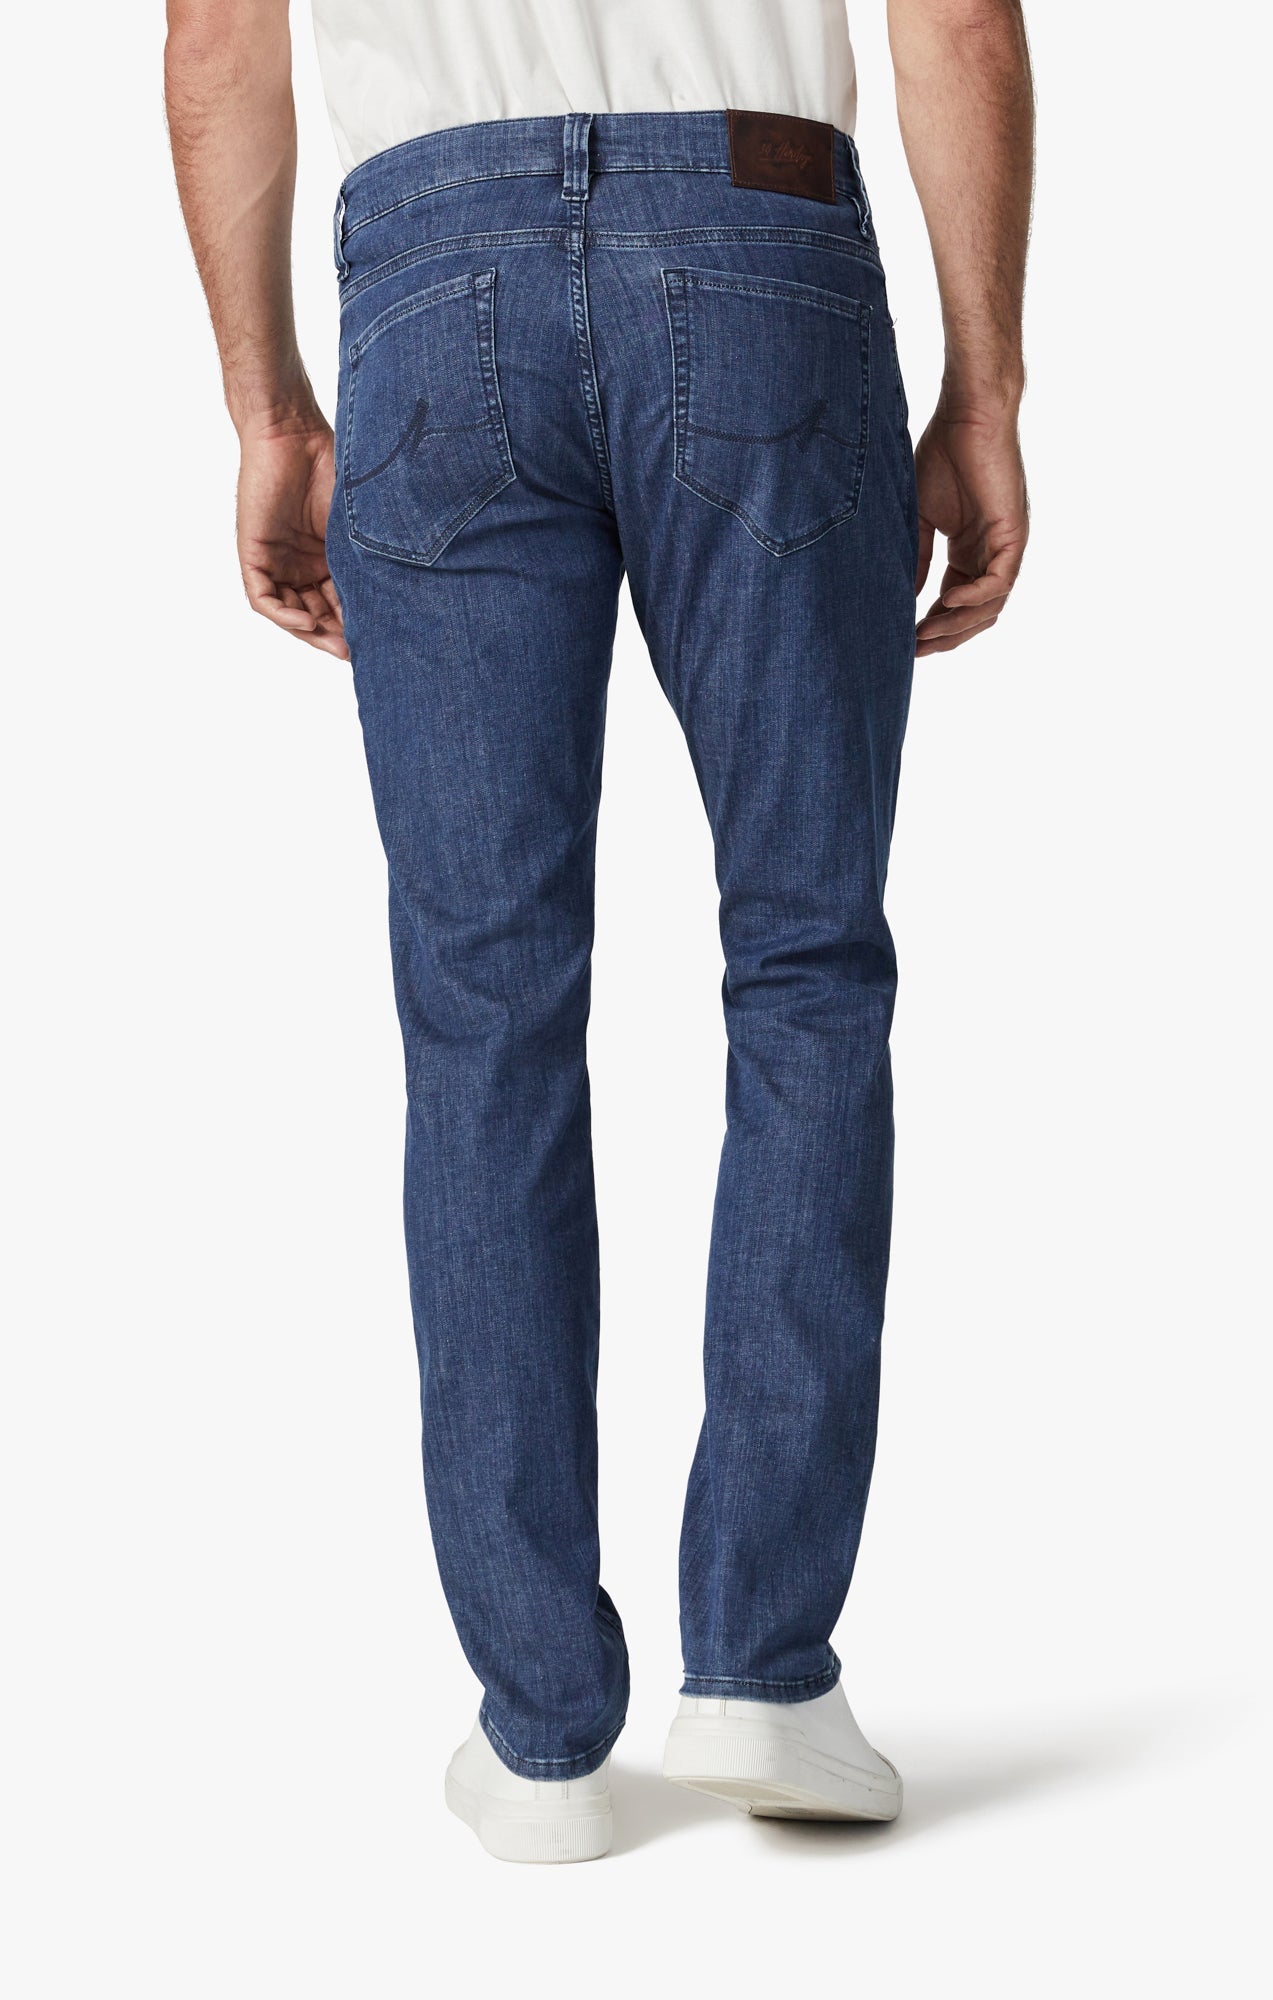 Courage Straight Leg Jeans In Mid Kona Image 5